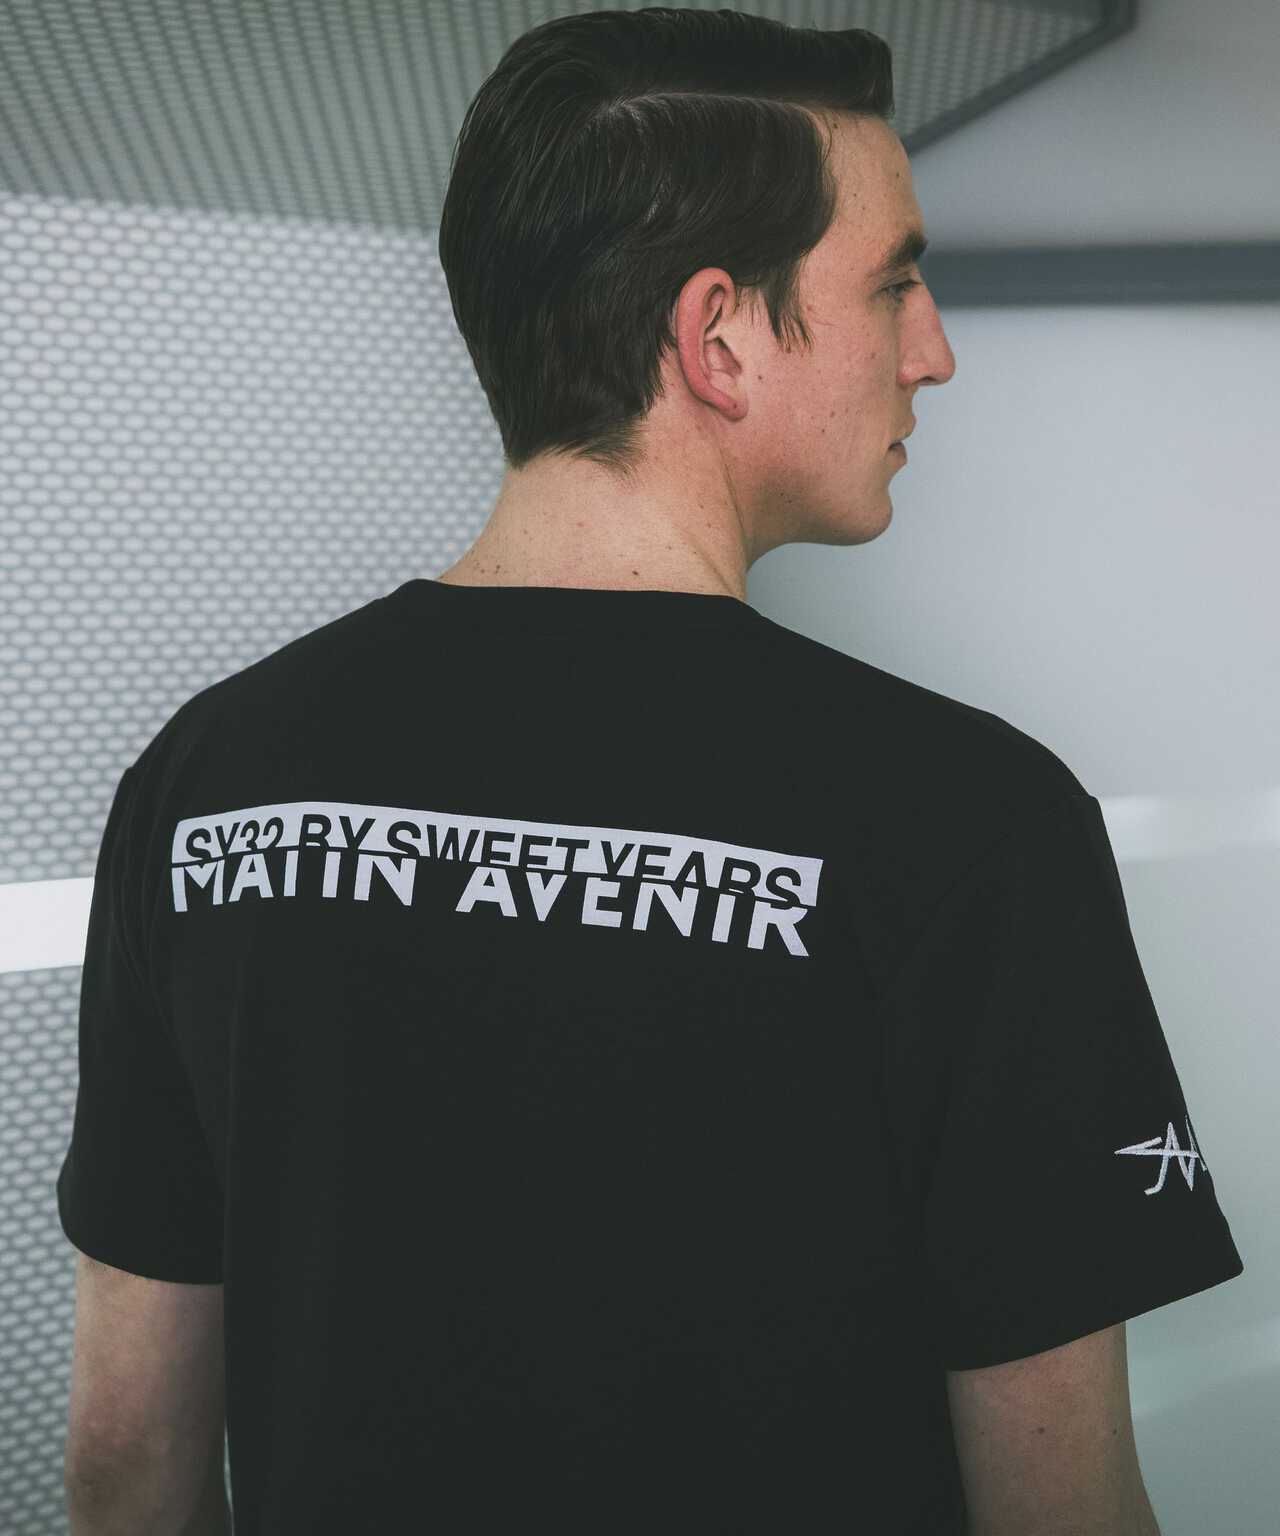 MATIN AVENIR×SY32 by SWEETYEARS×ROYAL FLASH/COLLABORATION T-SHIRTS 